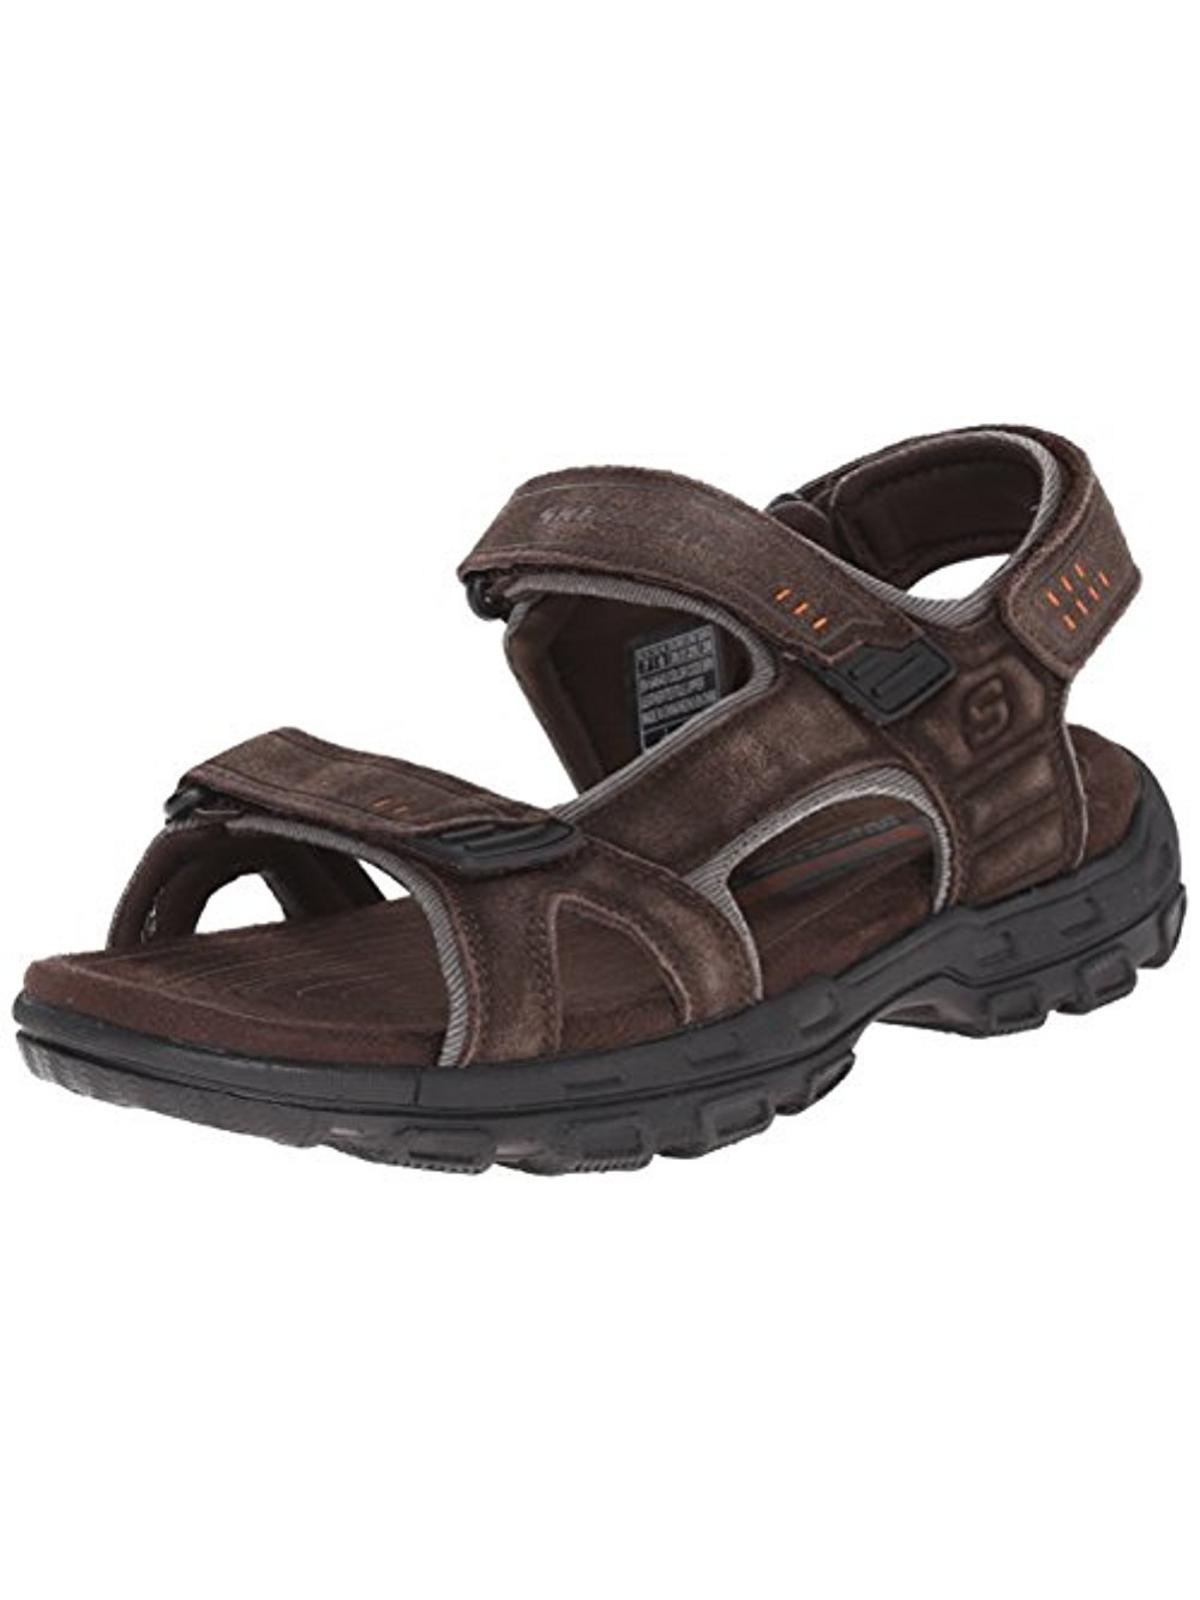 Skechers Gander Alex Mens Leather Relaxed Fit Flat Sandals In Brown